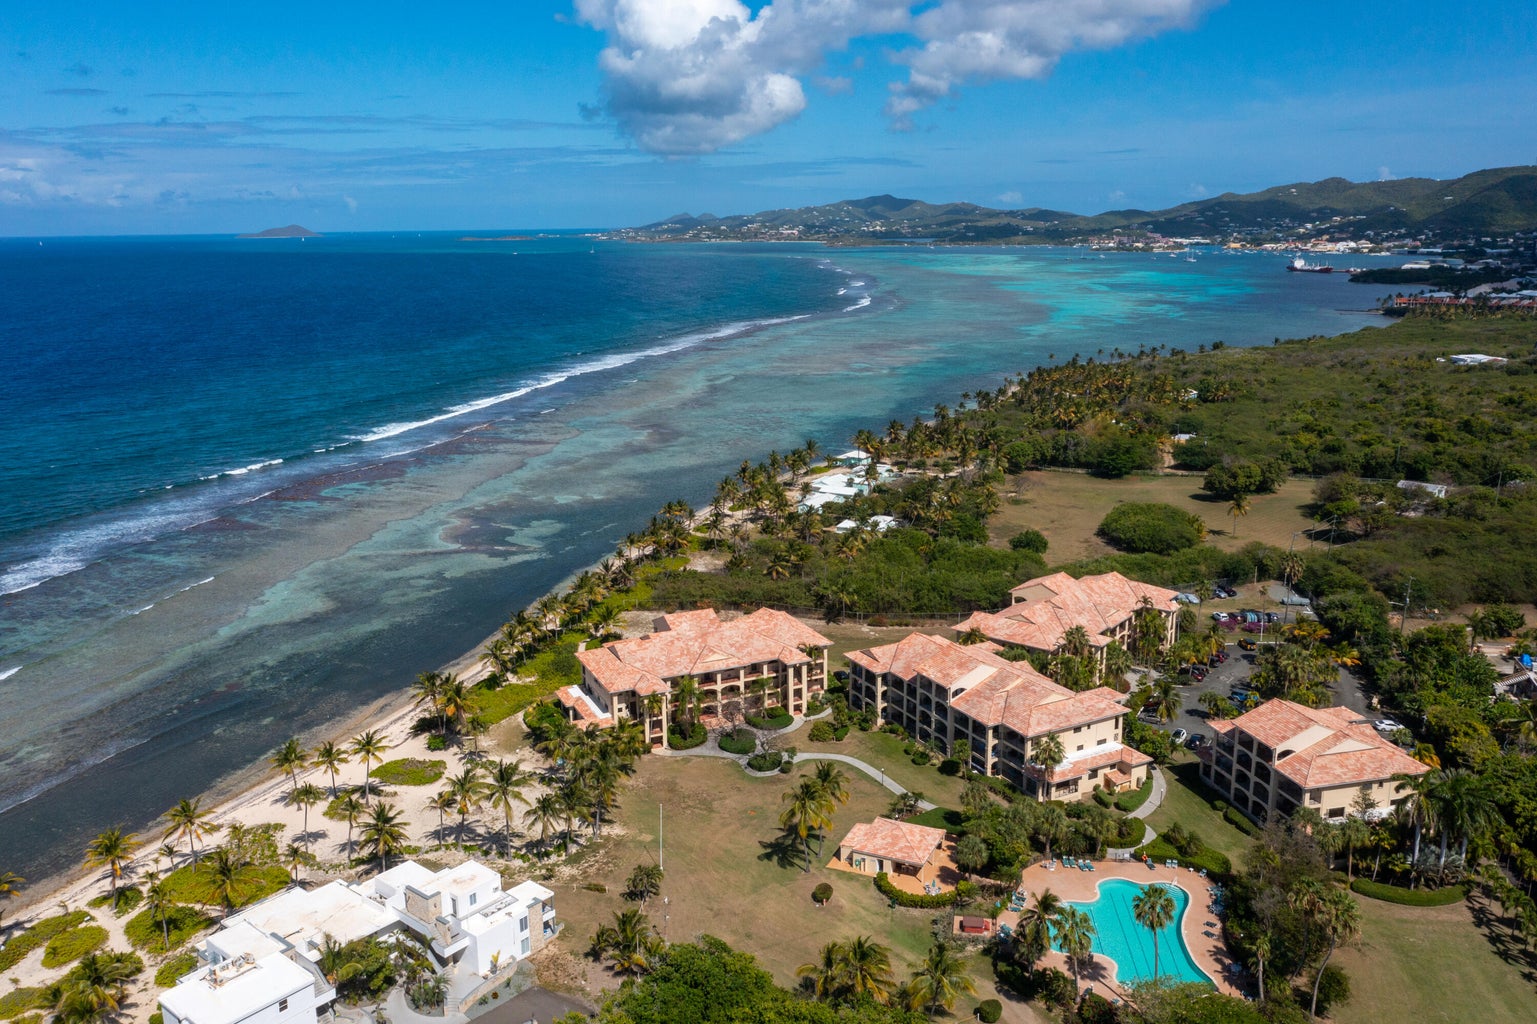 Experience Luxury Living with Premier Properties USVI: Immaculate Vacation Rentals, Corporate Retreats, and Property Management Services